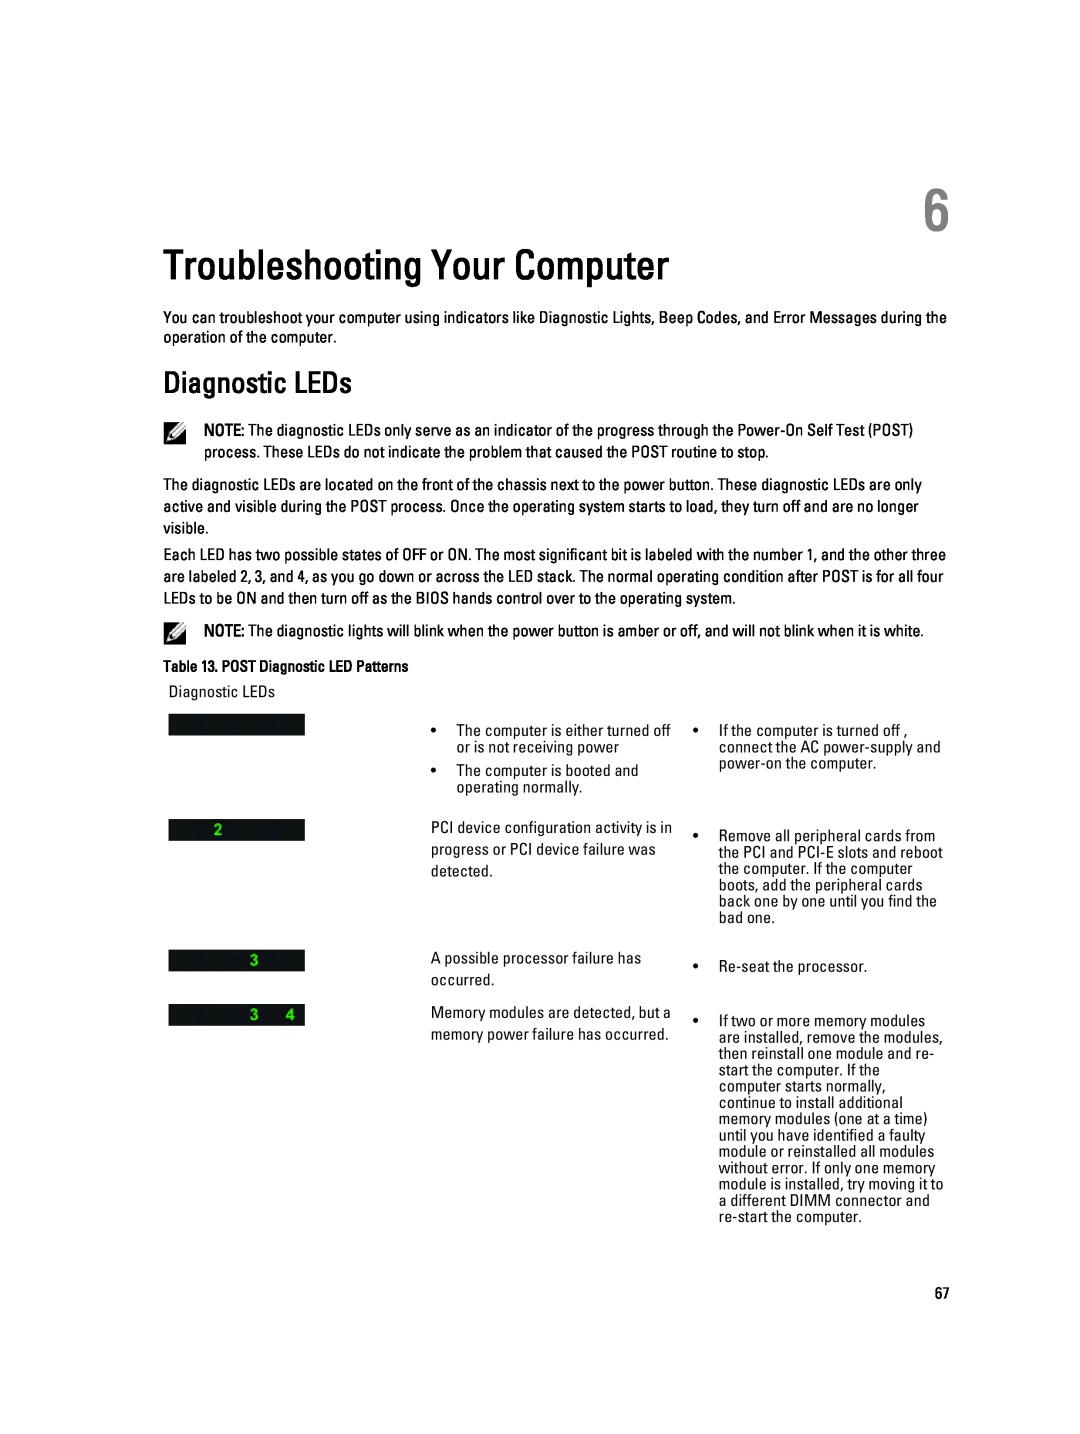 Dell T7610 owner manual Troubleshooting Your Computer, Diagnostic LEDs 